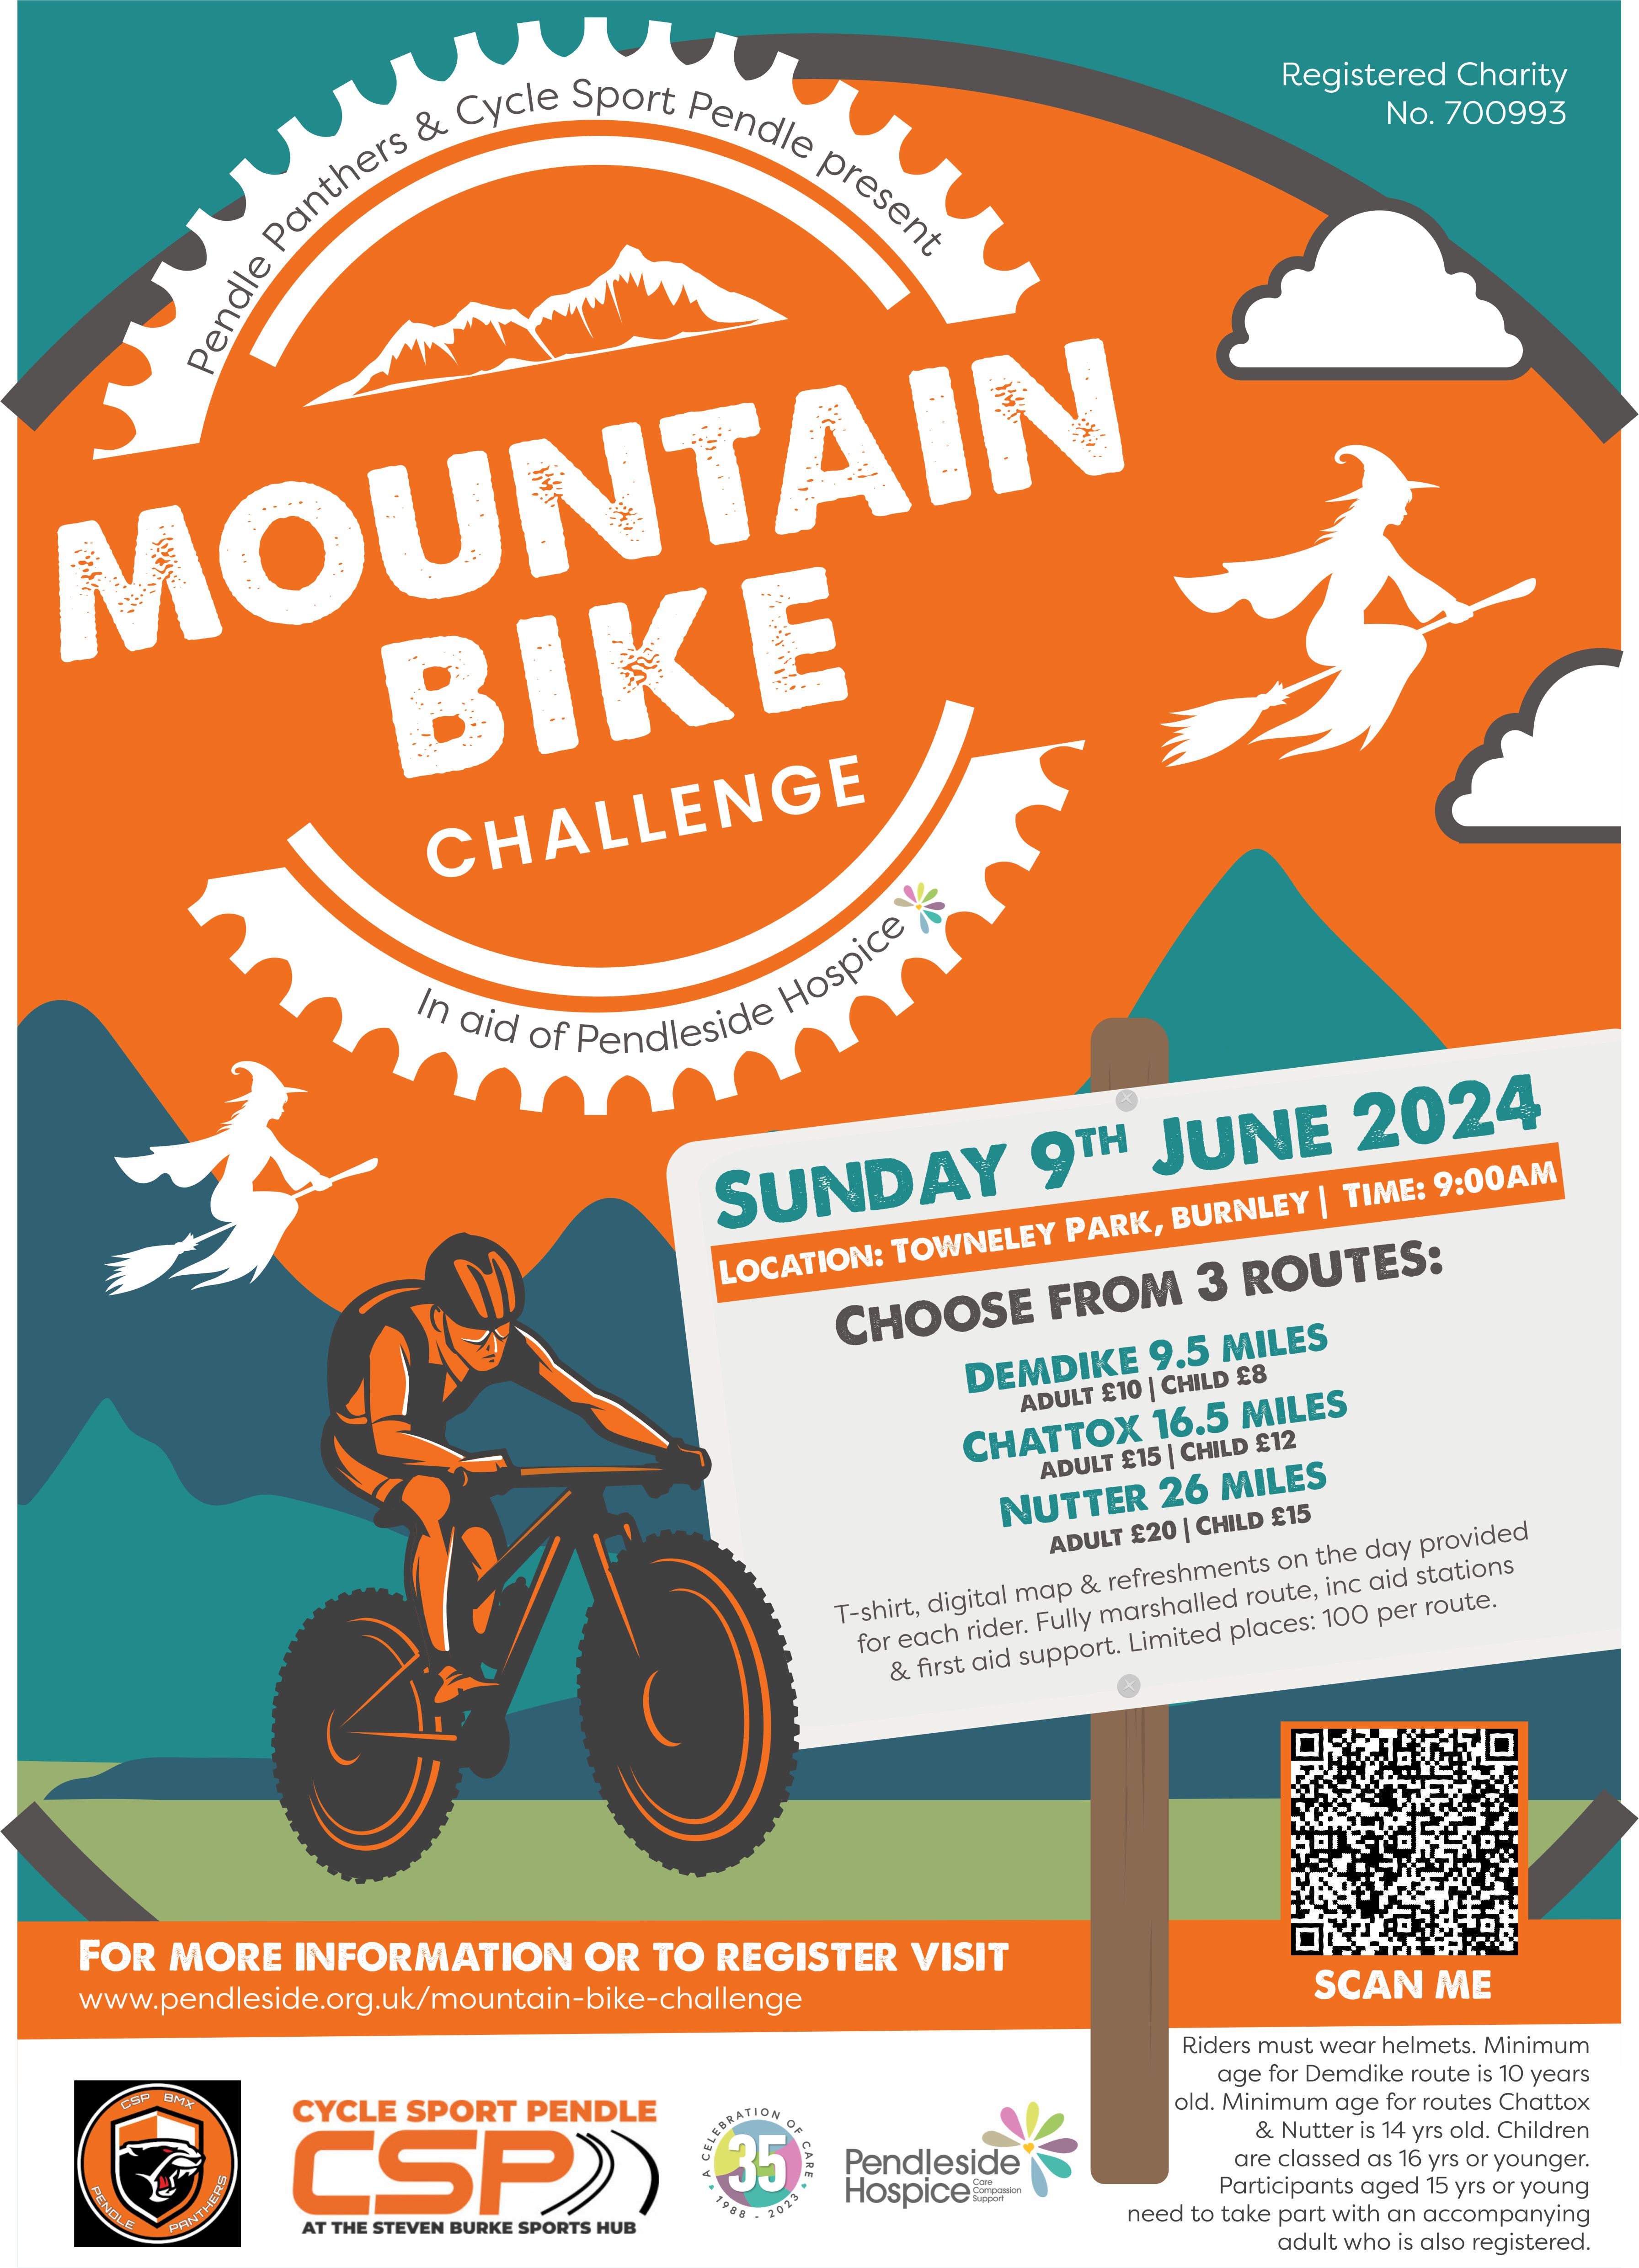 Mountain Bike Challenge in aid of Pendleside